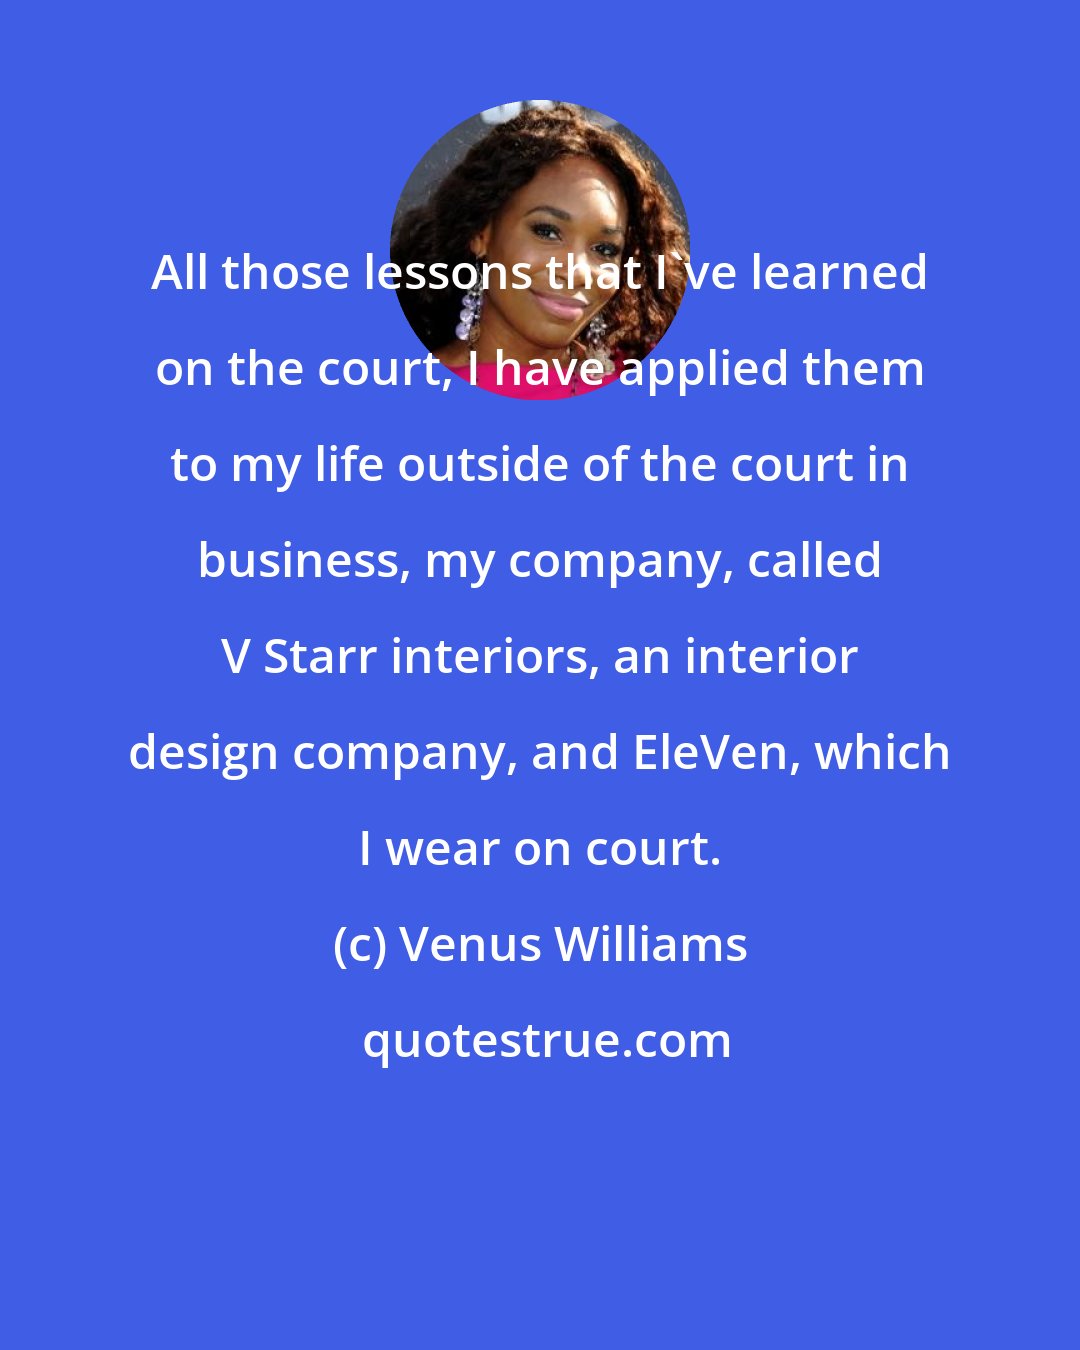 Venus Williams: All those lessons that I've learned on the court, I have applied them to my life outside of the court in business, my company, called V Starr interiors, an interior design company, and EleVen, which I wear on court.